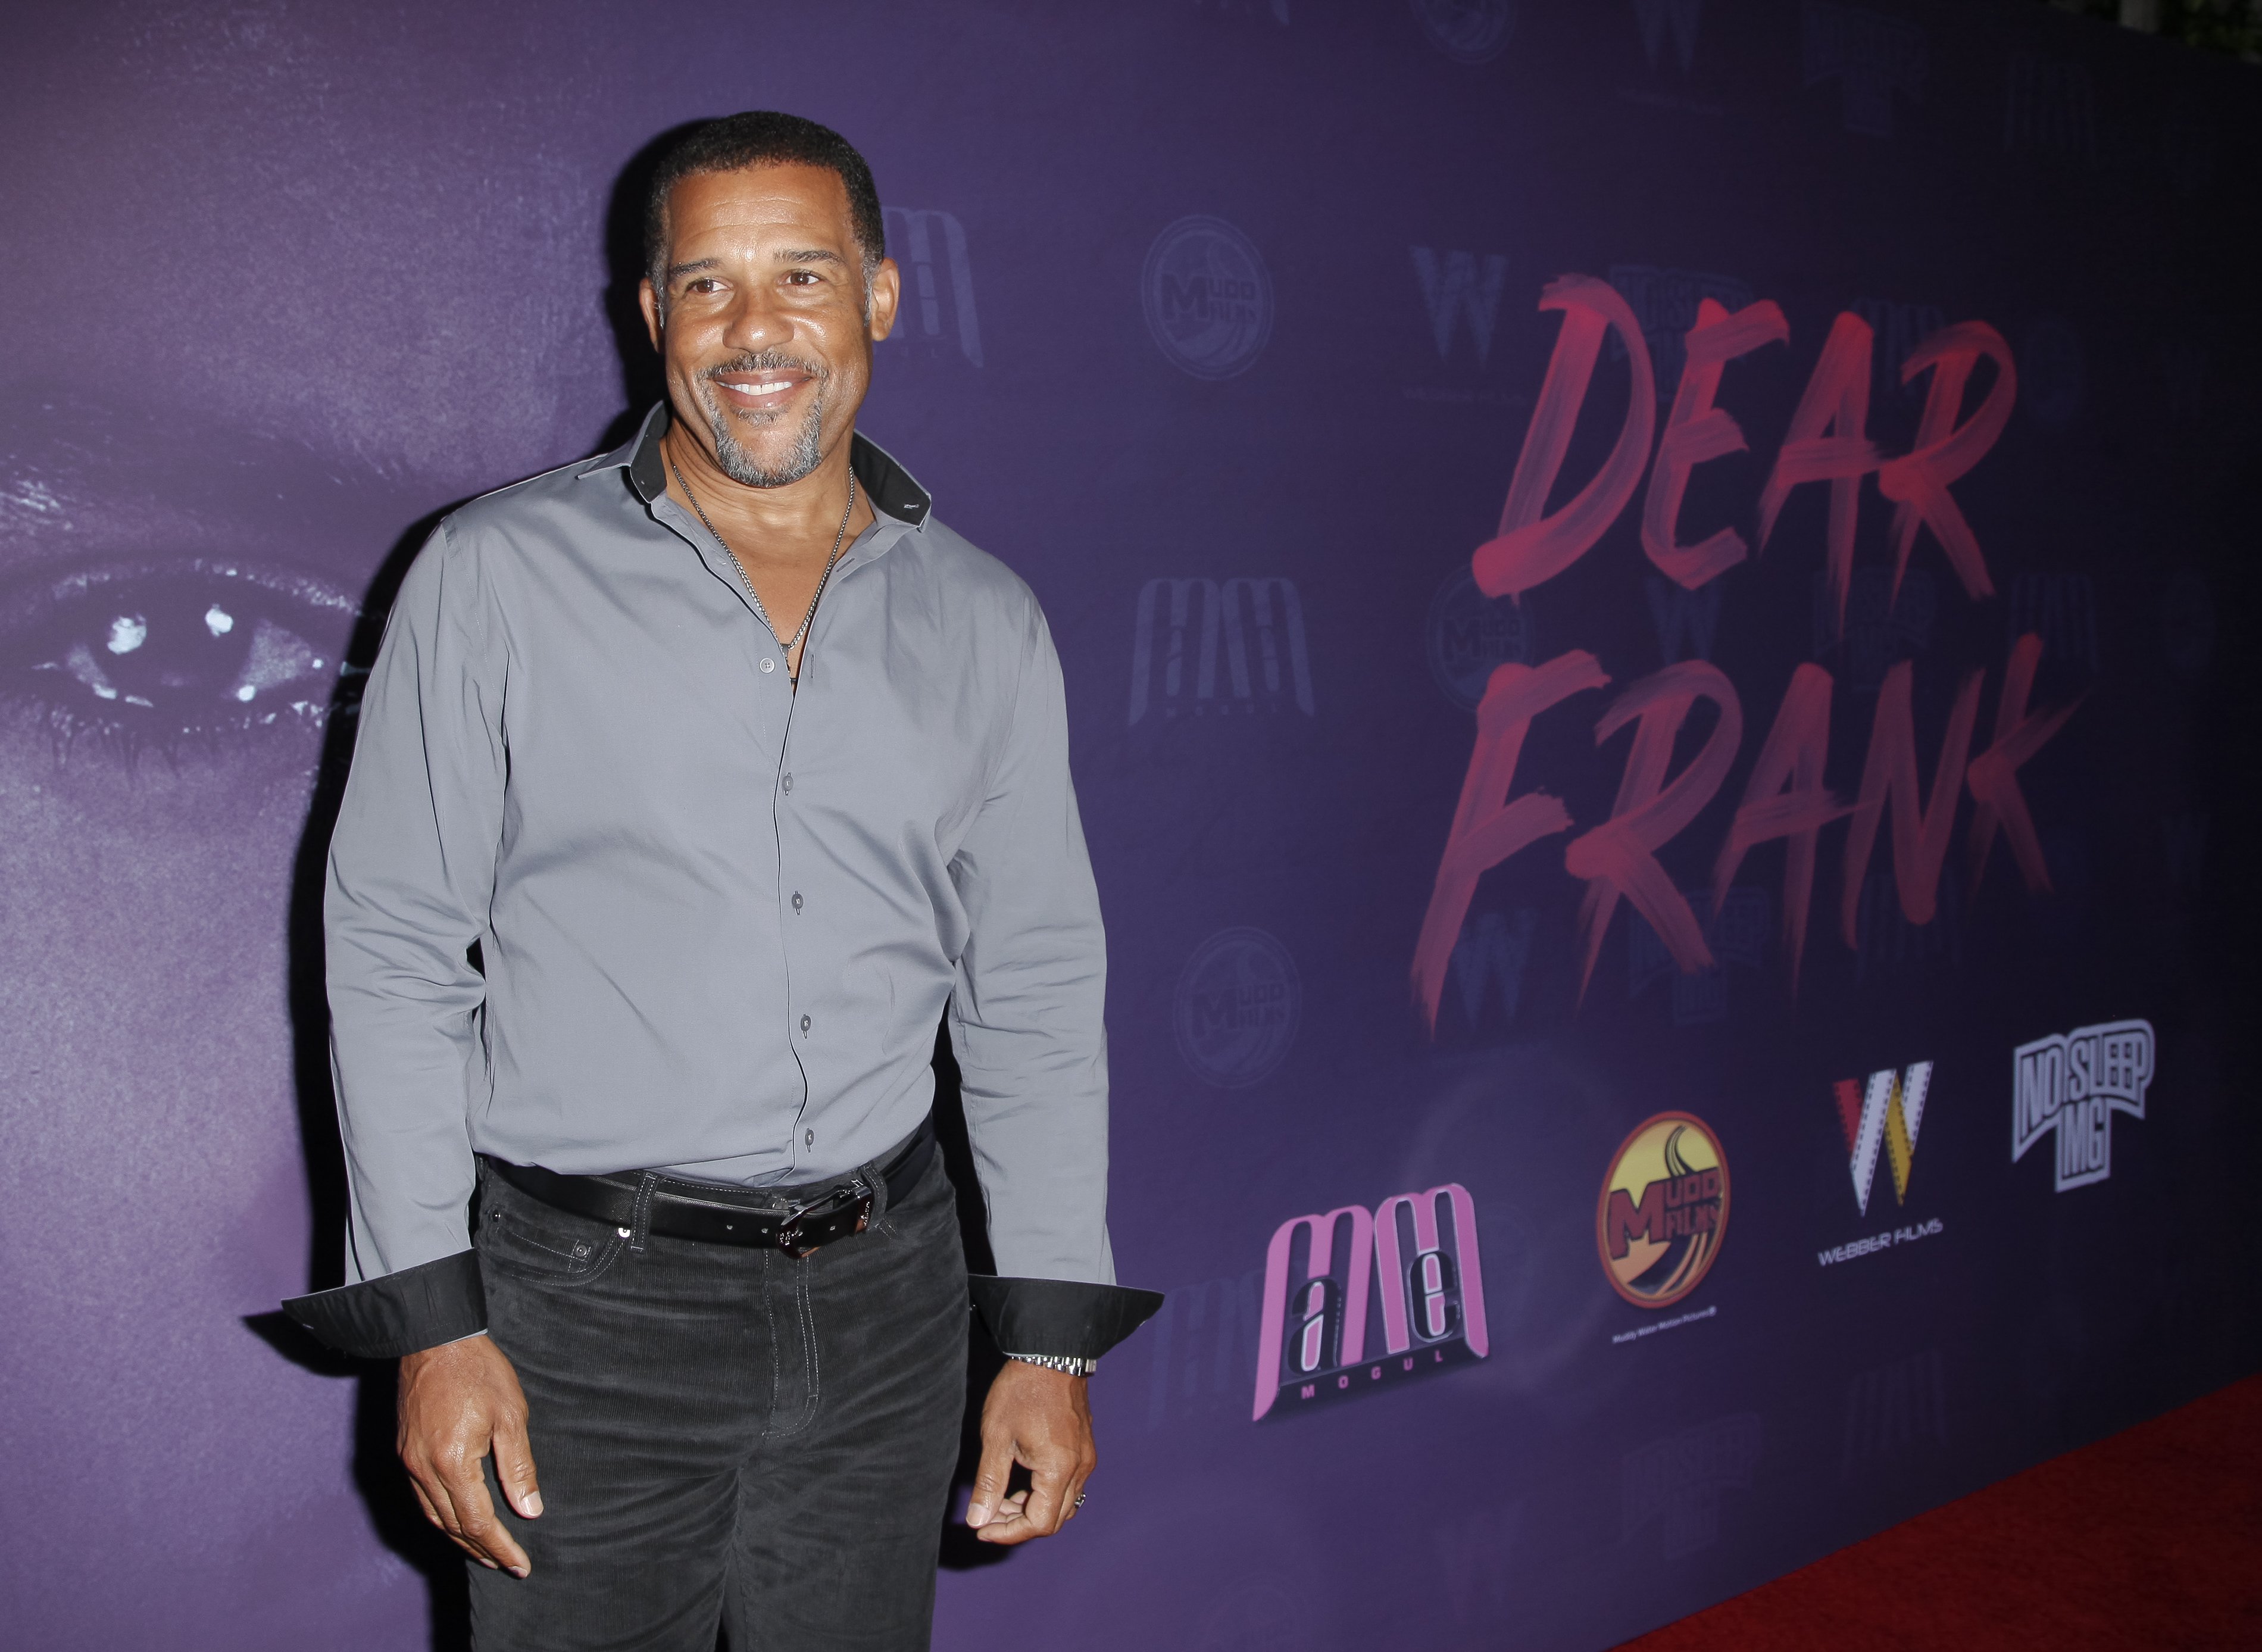 Peter Parros at the "Dear Frank" movie premiere at Raleigh Studios on August 10, 2019 in Los Angeles, California | Photo: Getty Images